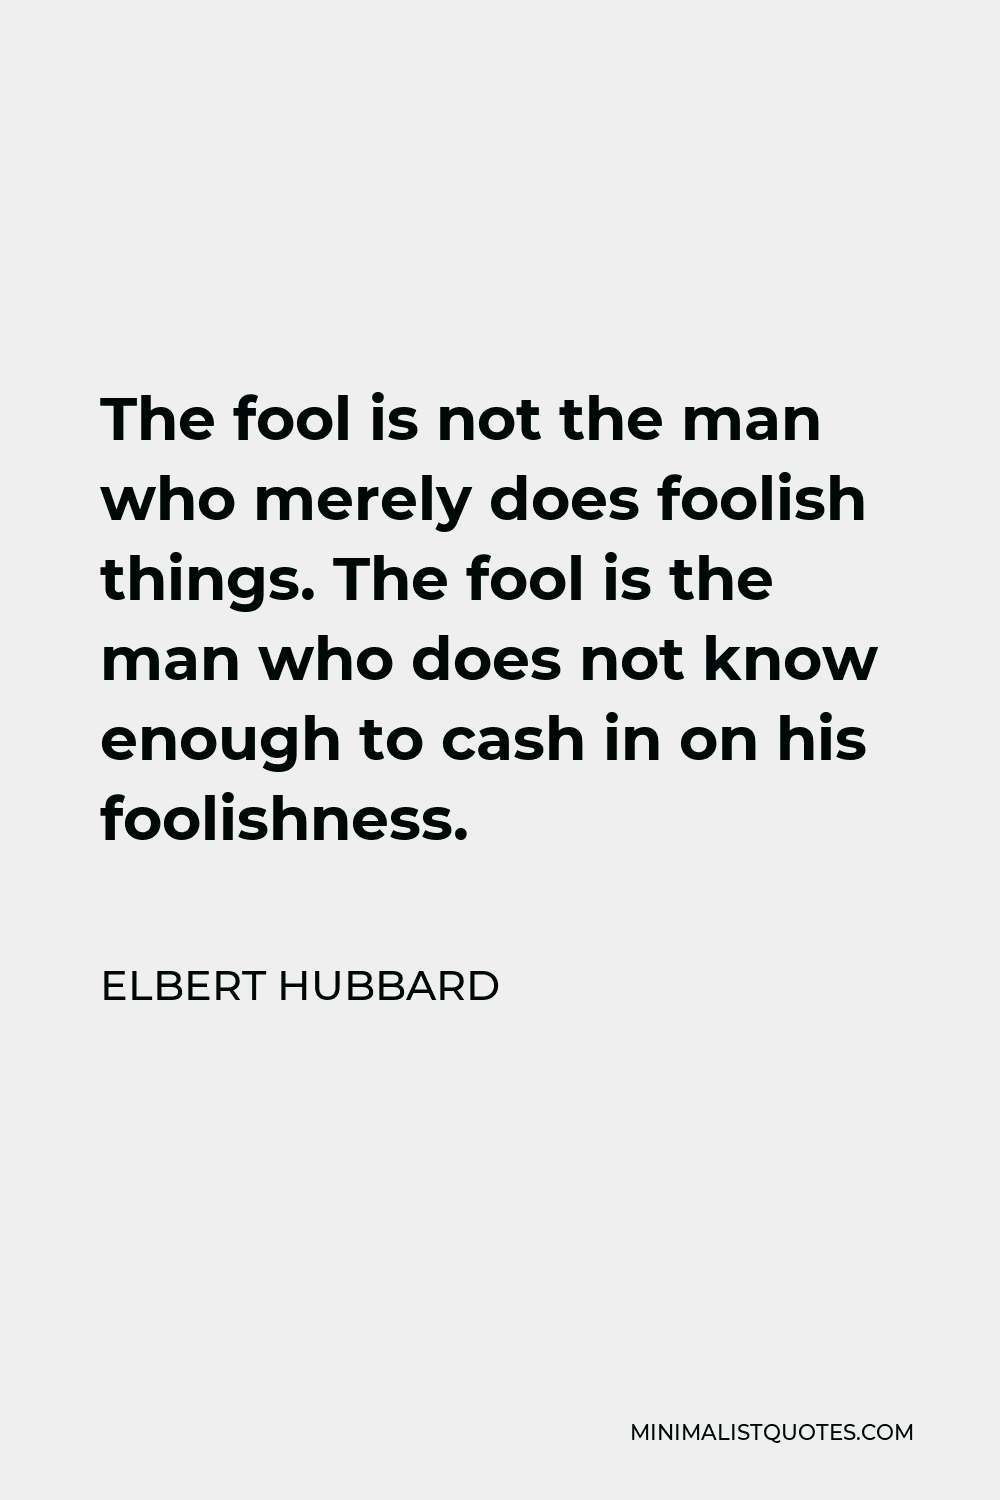 Elbert Hubbard Quote - The fool is not the man who merely does foolish things. The fool is the man who does not know enough to cash in on his foolishness.